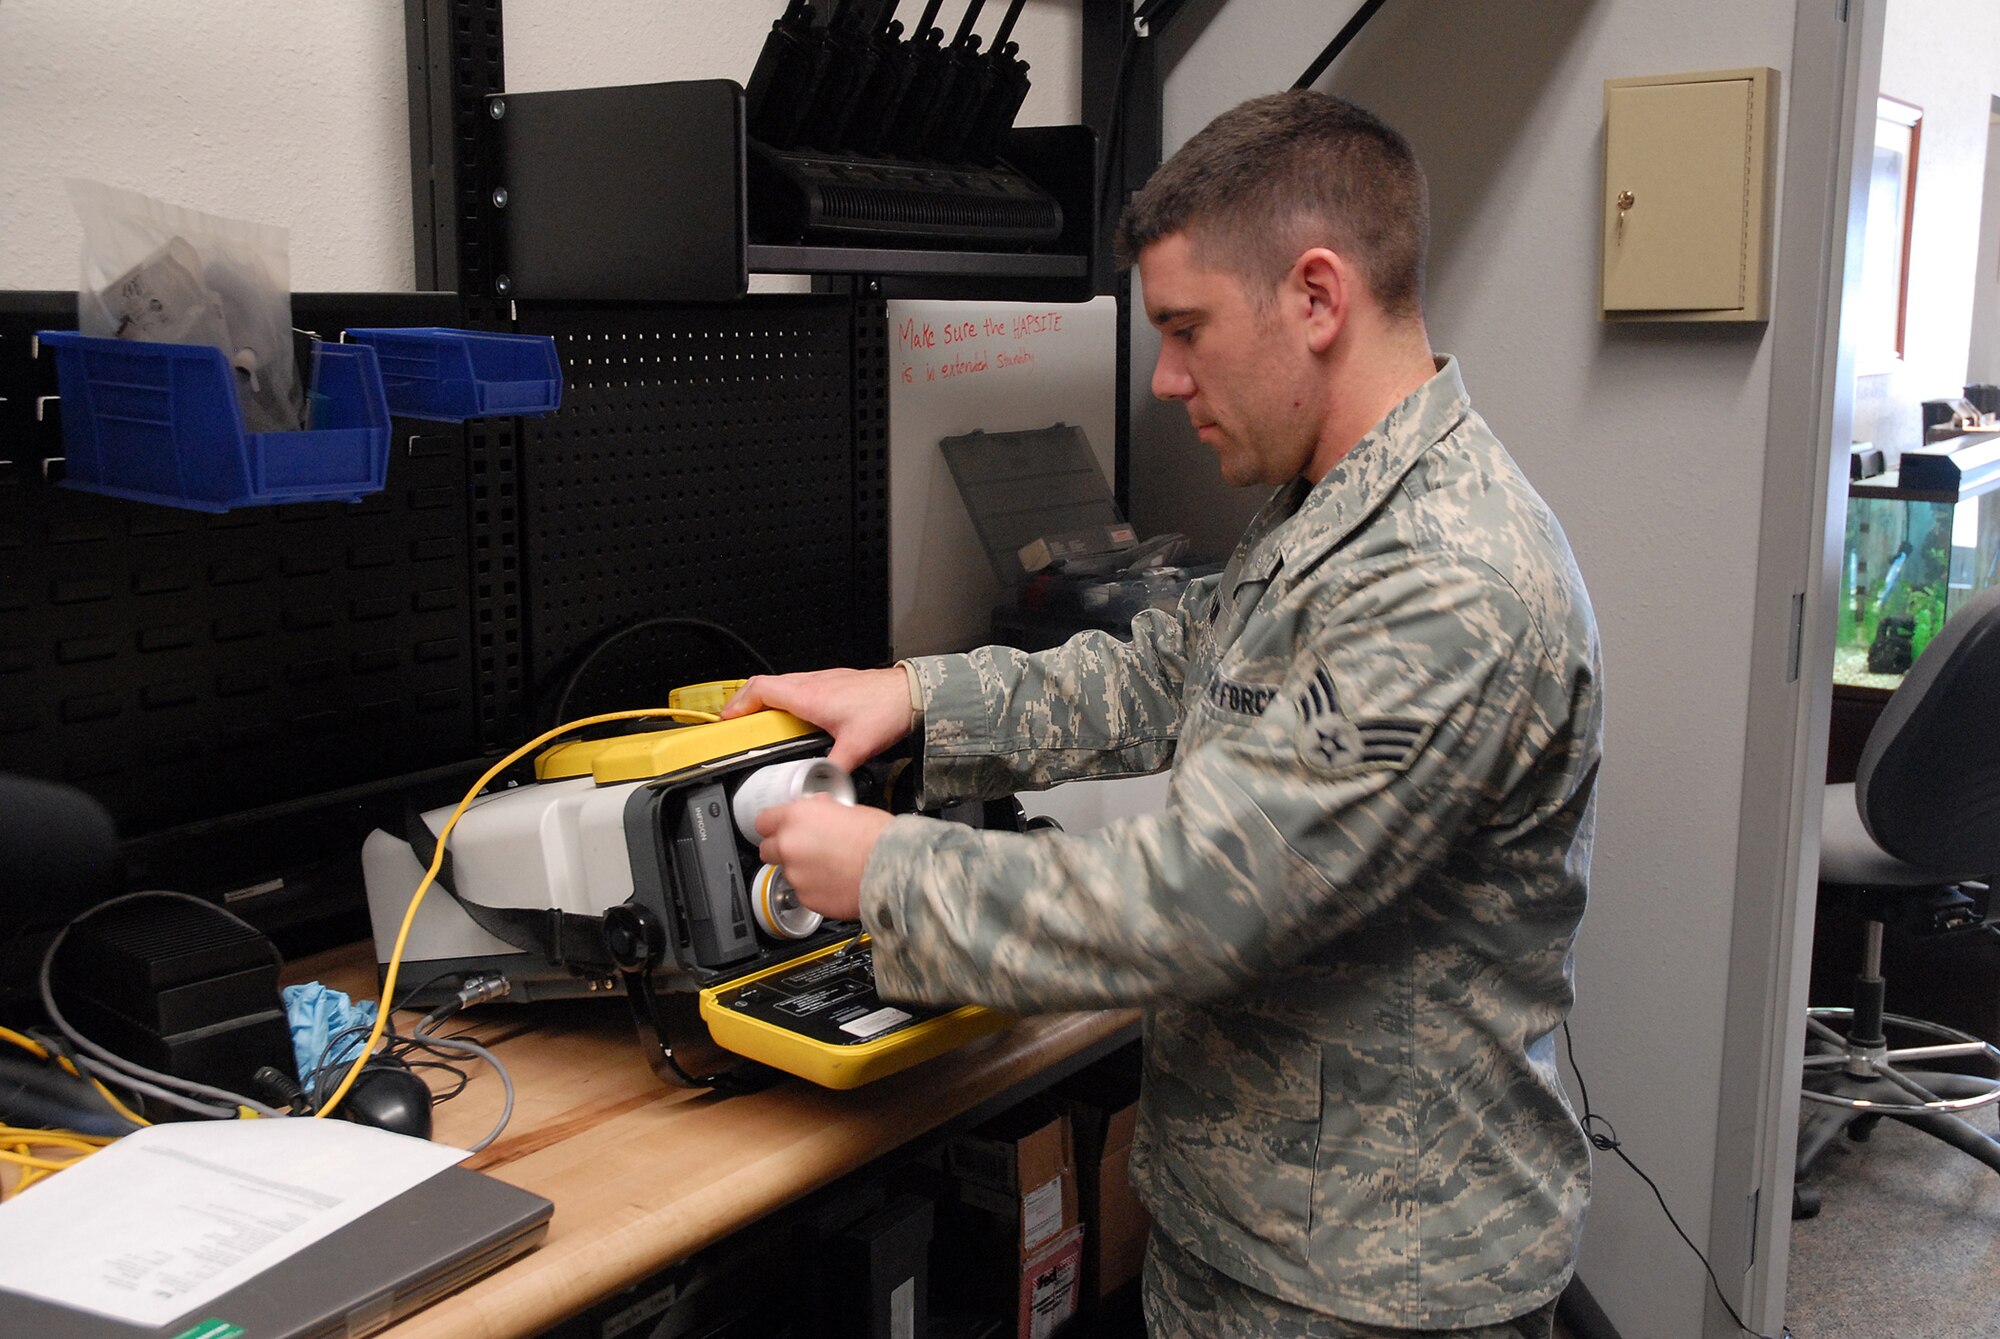 Senior Airman Rich Frank loads testing equipment with baseline gases to ensure it functions properly March 4 in the bioenvironmental building. (U.S. Air Force photo/Staff Sgt. Dillon White)